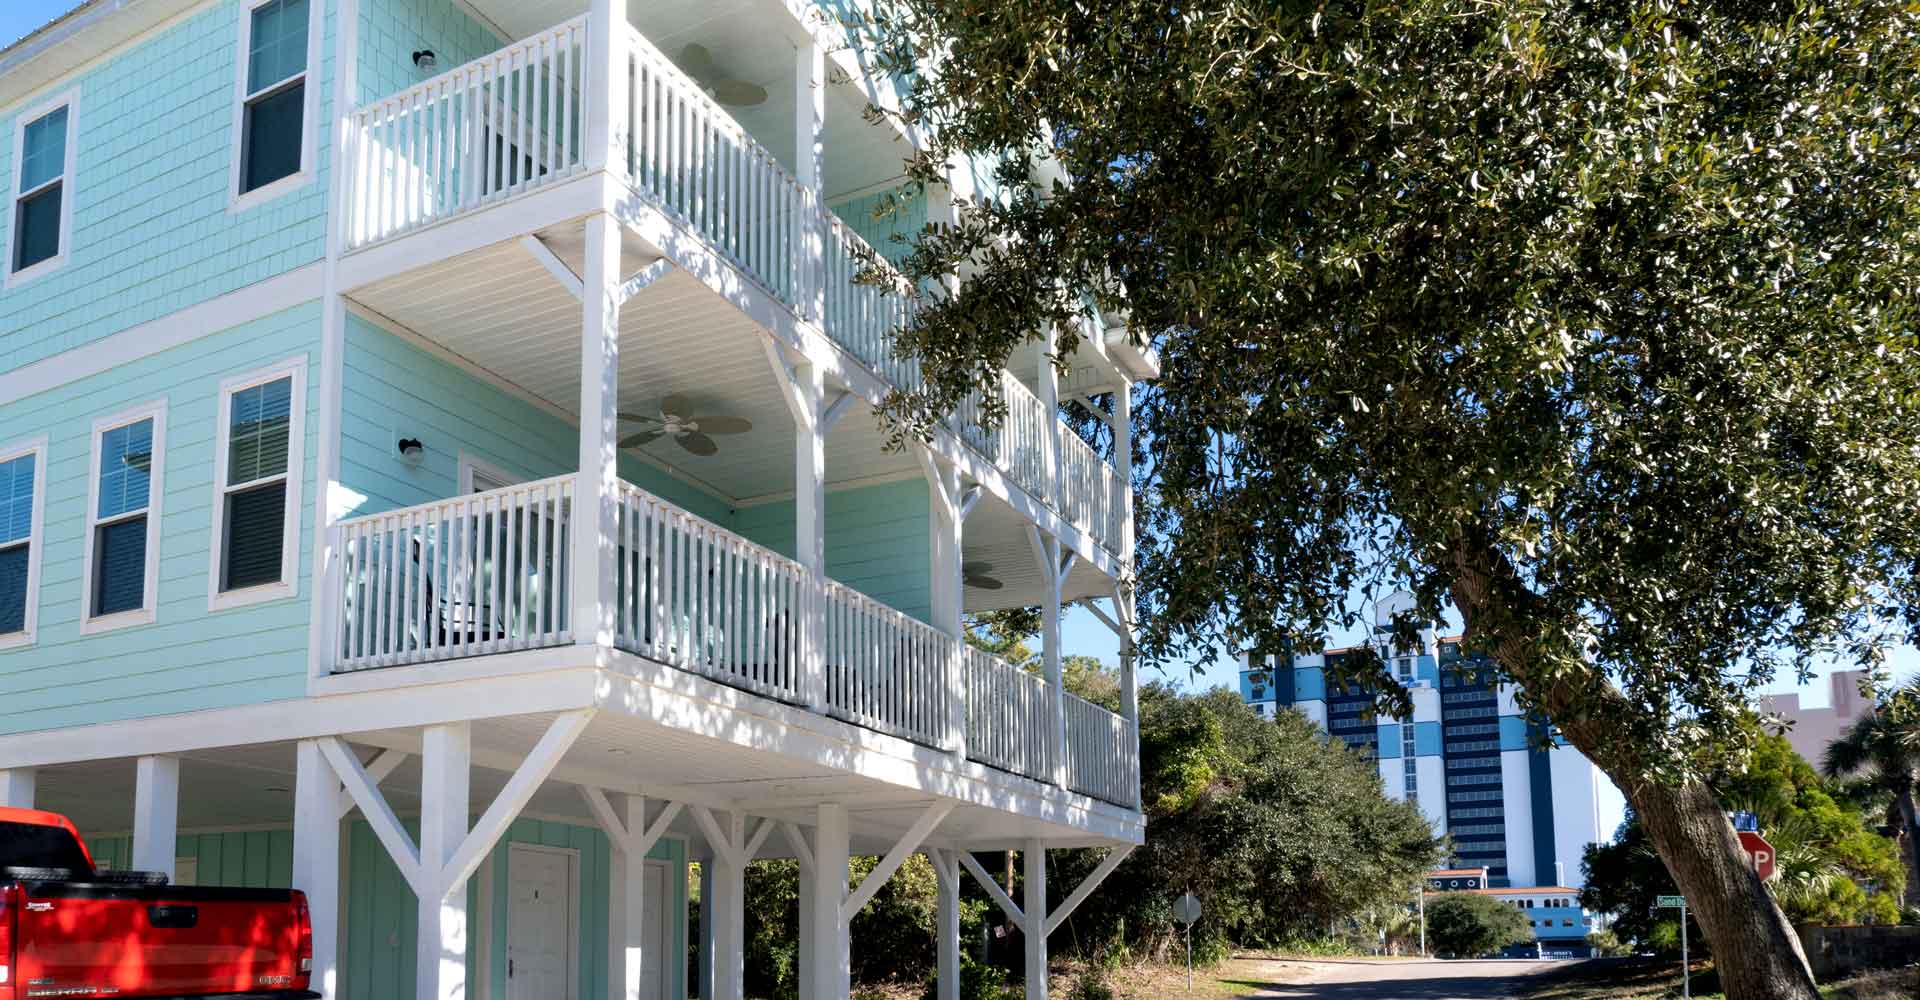 Hotels in Myrtle Beach SC  Wave Rider Resort Vacation Property